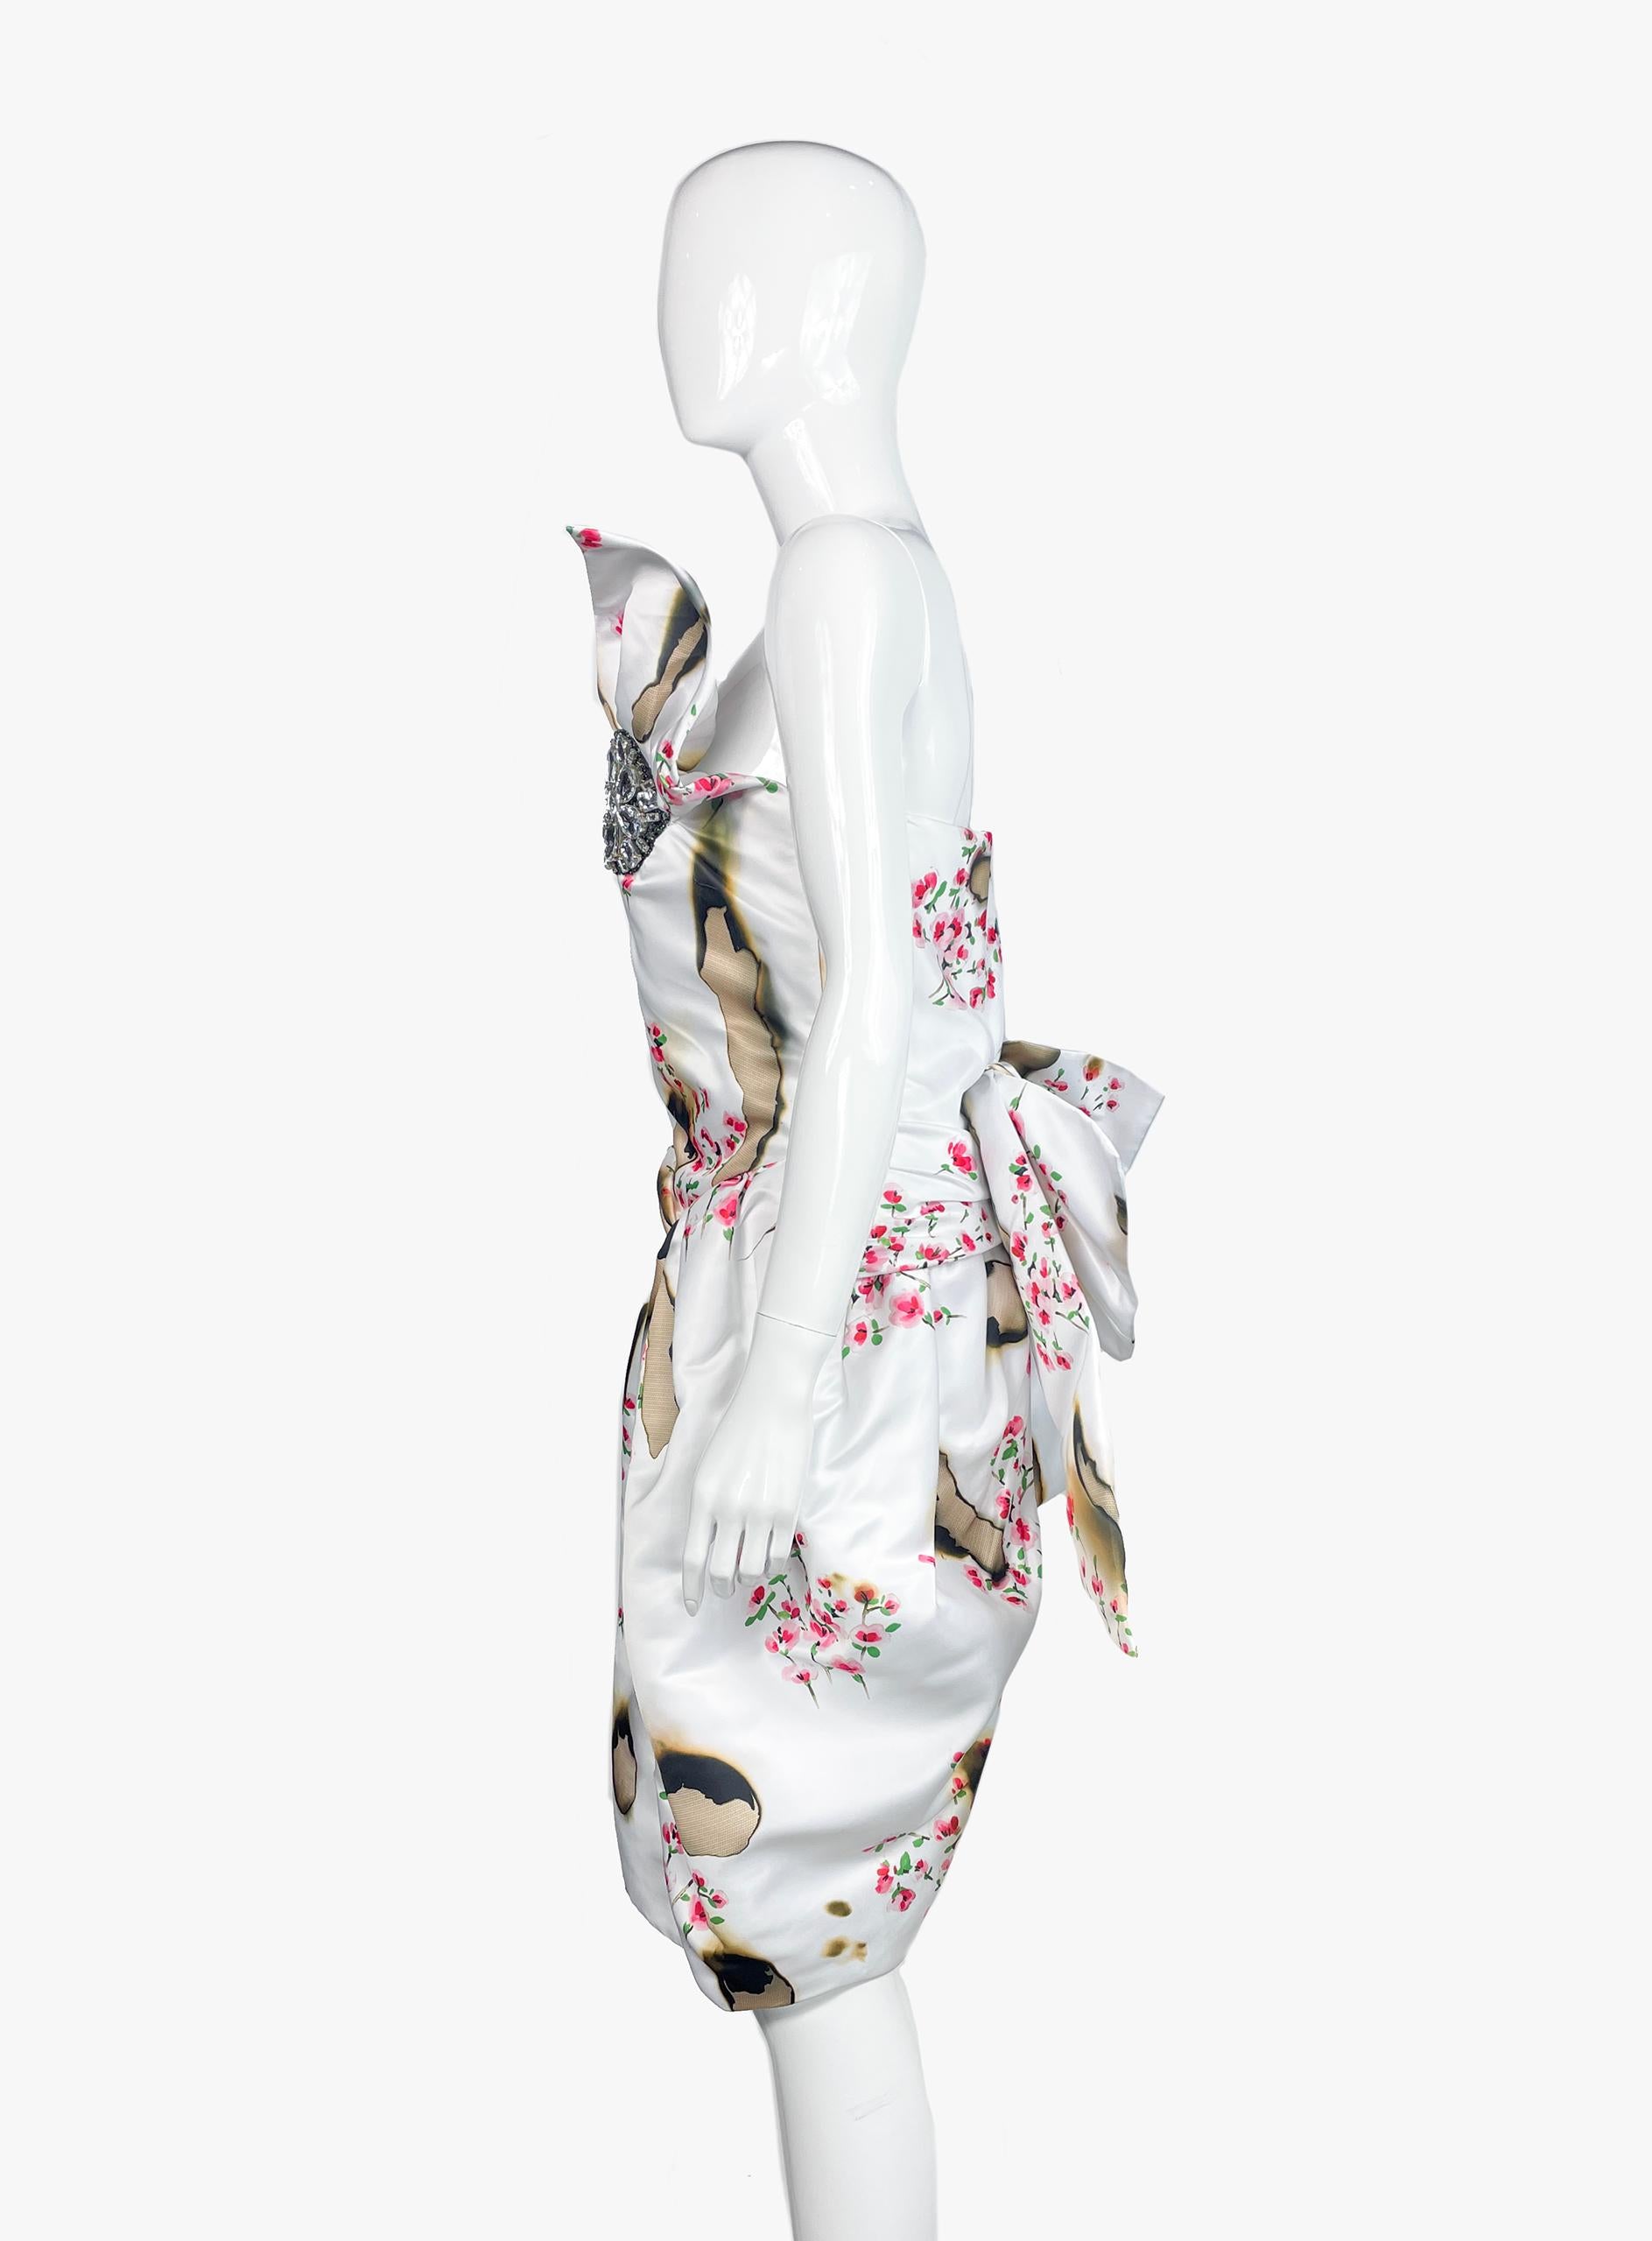 Women's Moschino Couture Floral Print Dress, 2000s For Sale